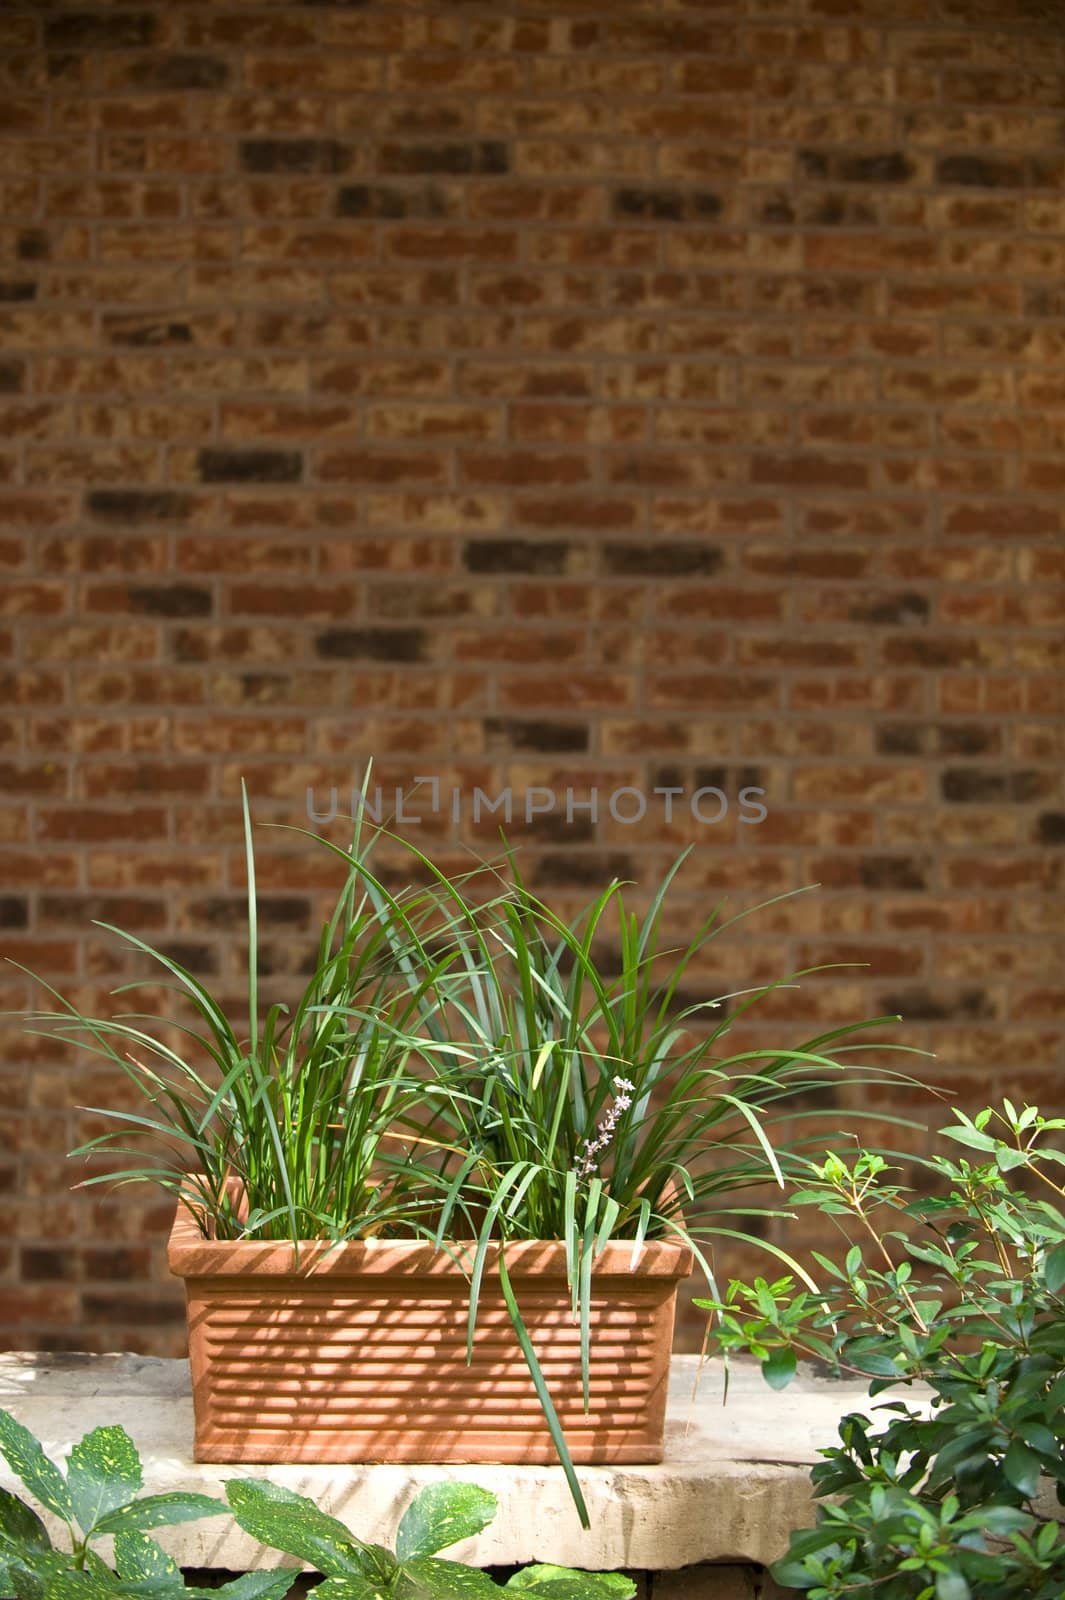 An image of a plant infront of brick wall